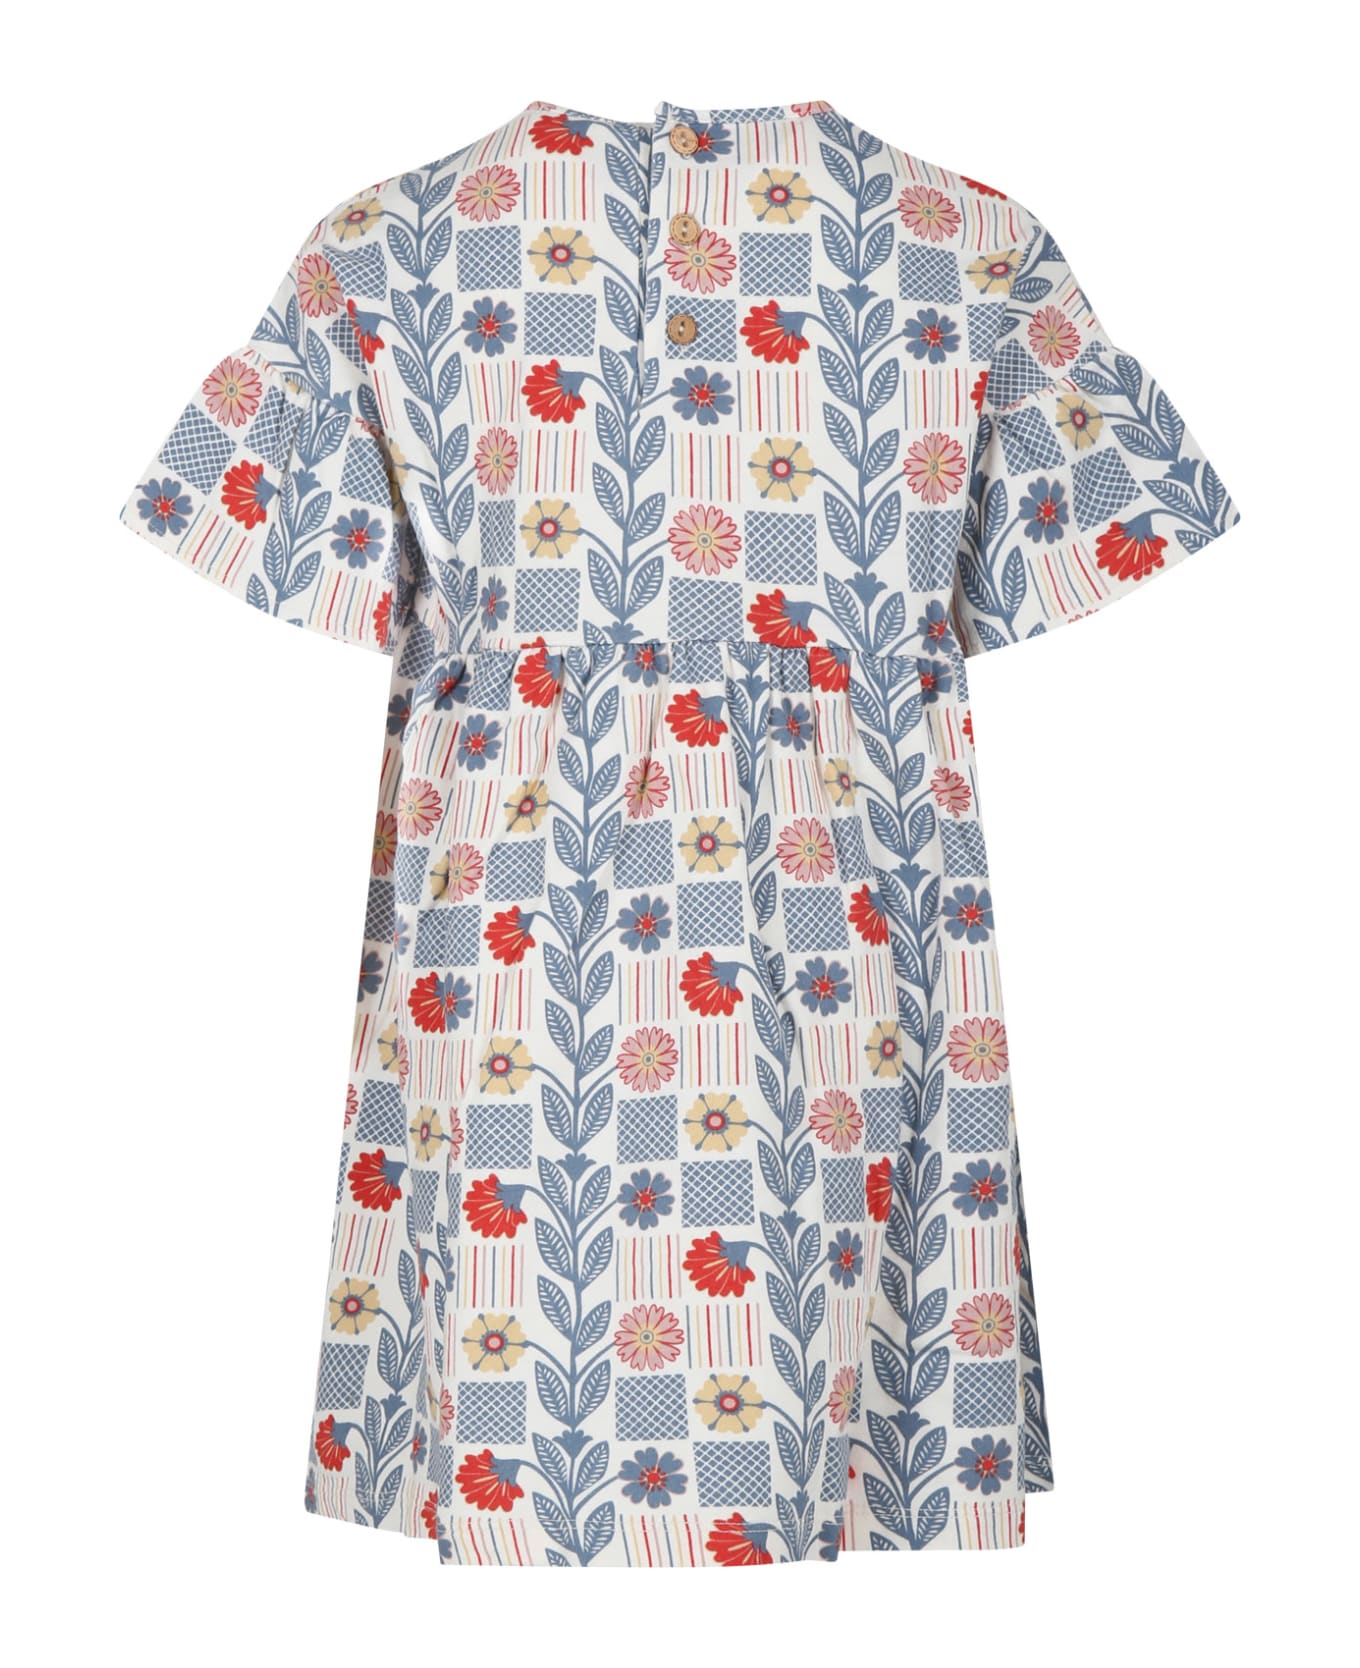 Coco Au Lait White Dress For Girl With Flowers Print - Multicolor ワンピース＆ドレス